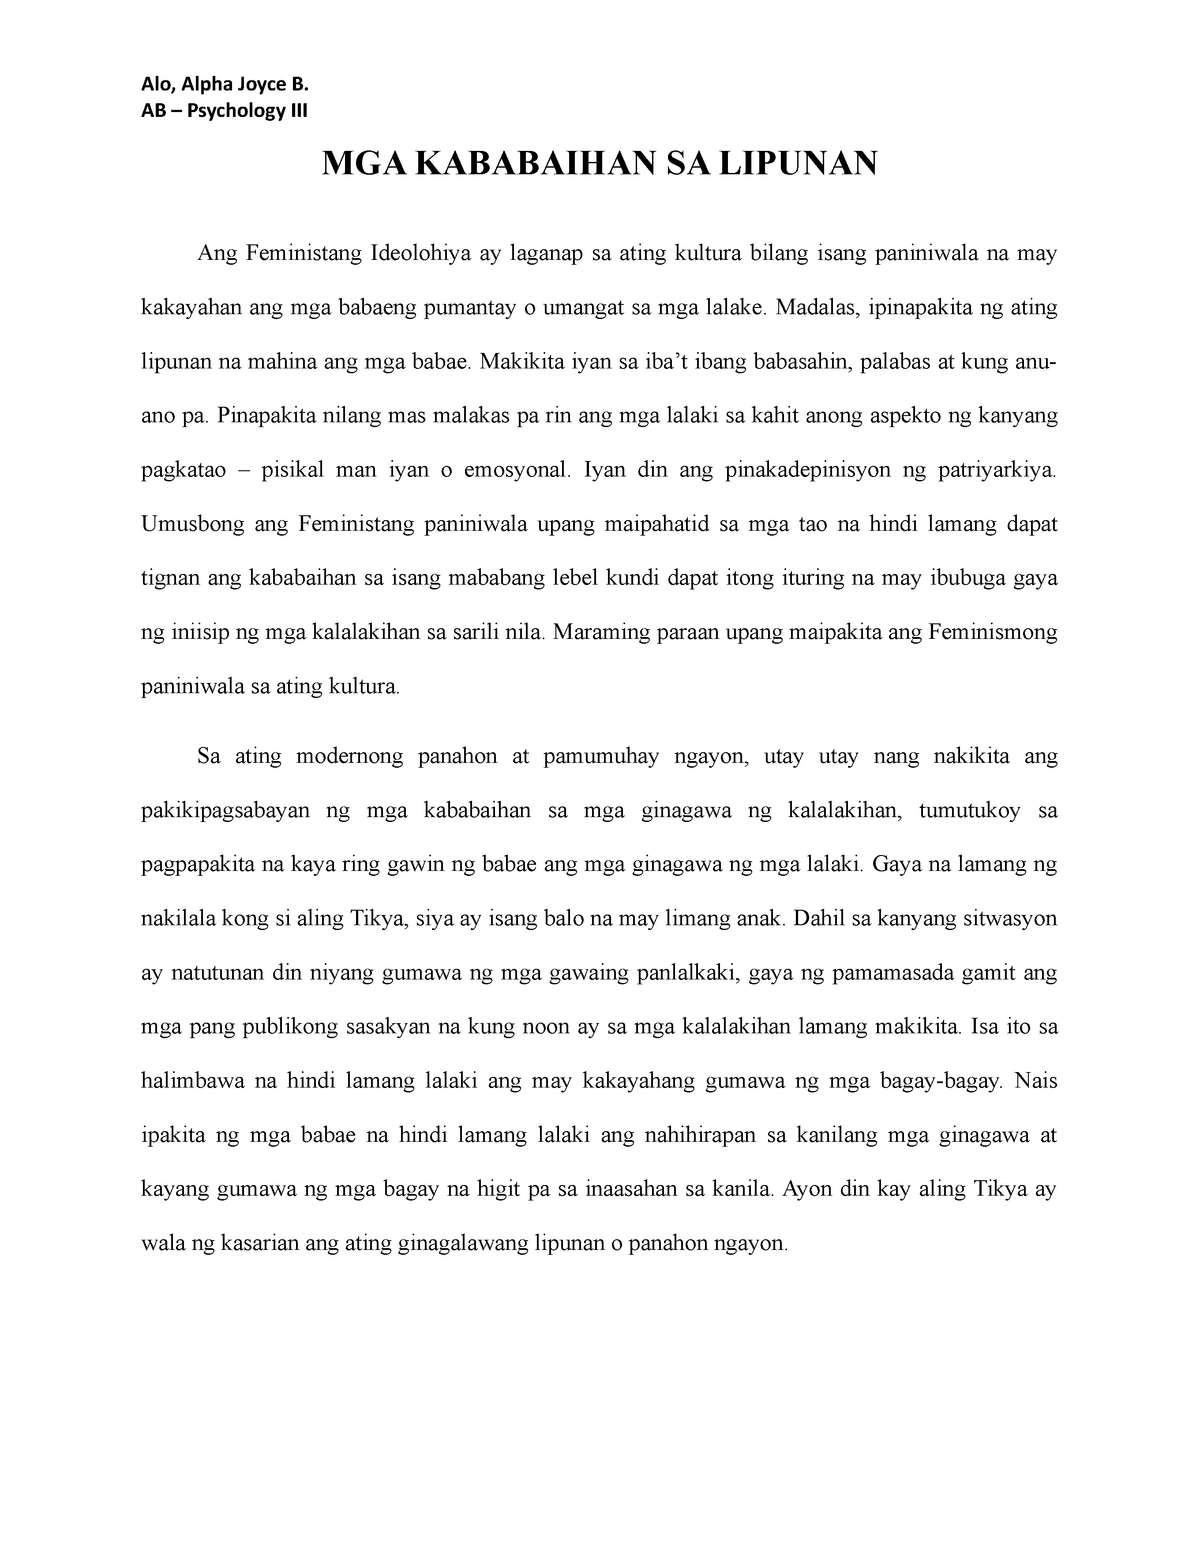 research proposal chapter 1 2 3